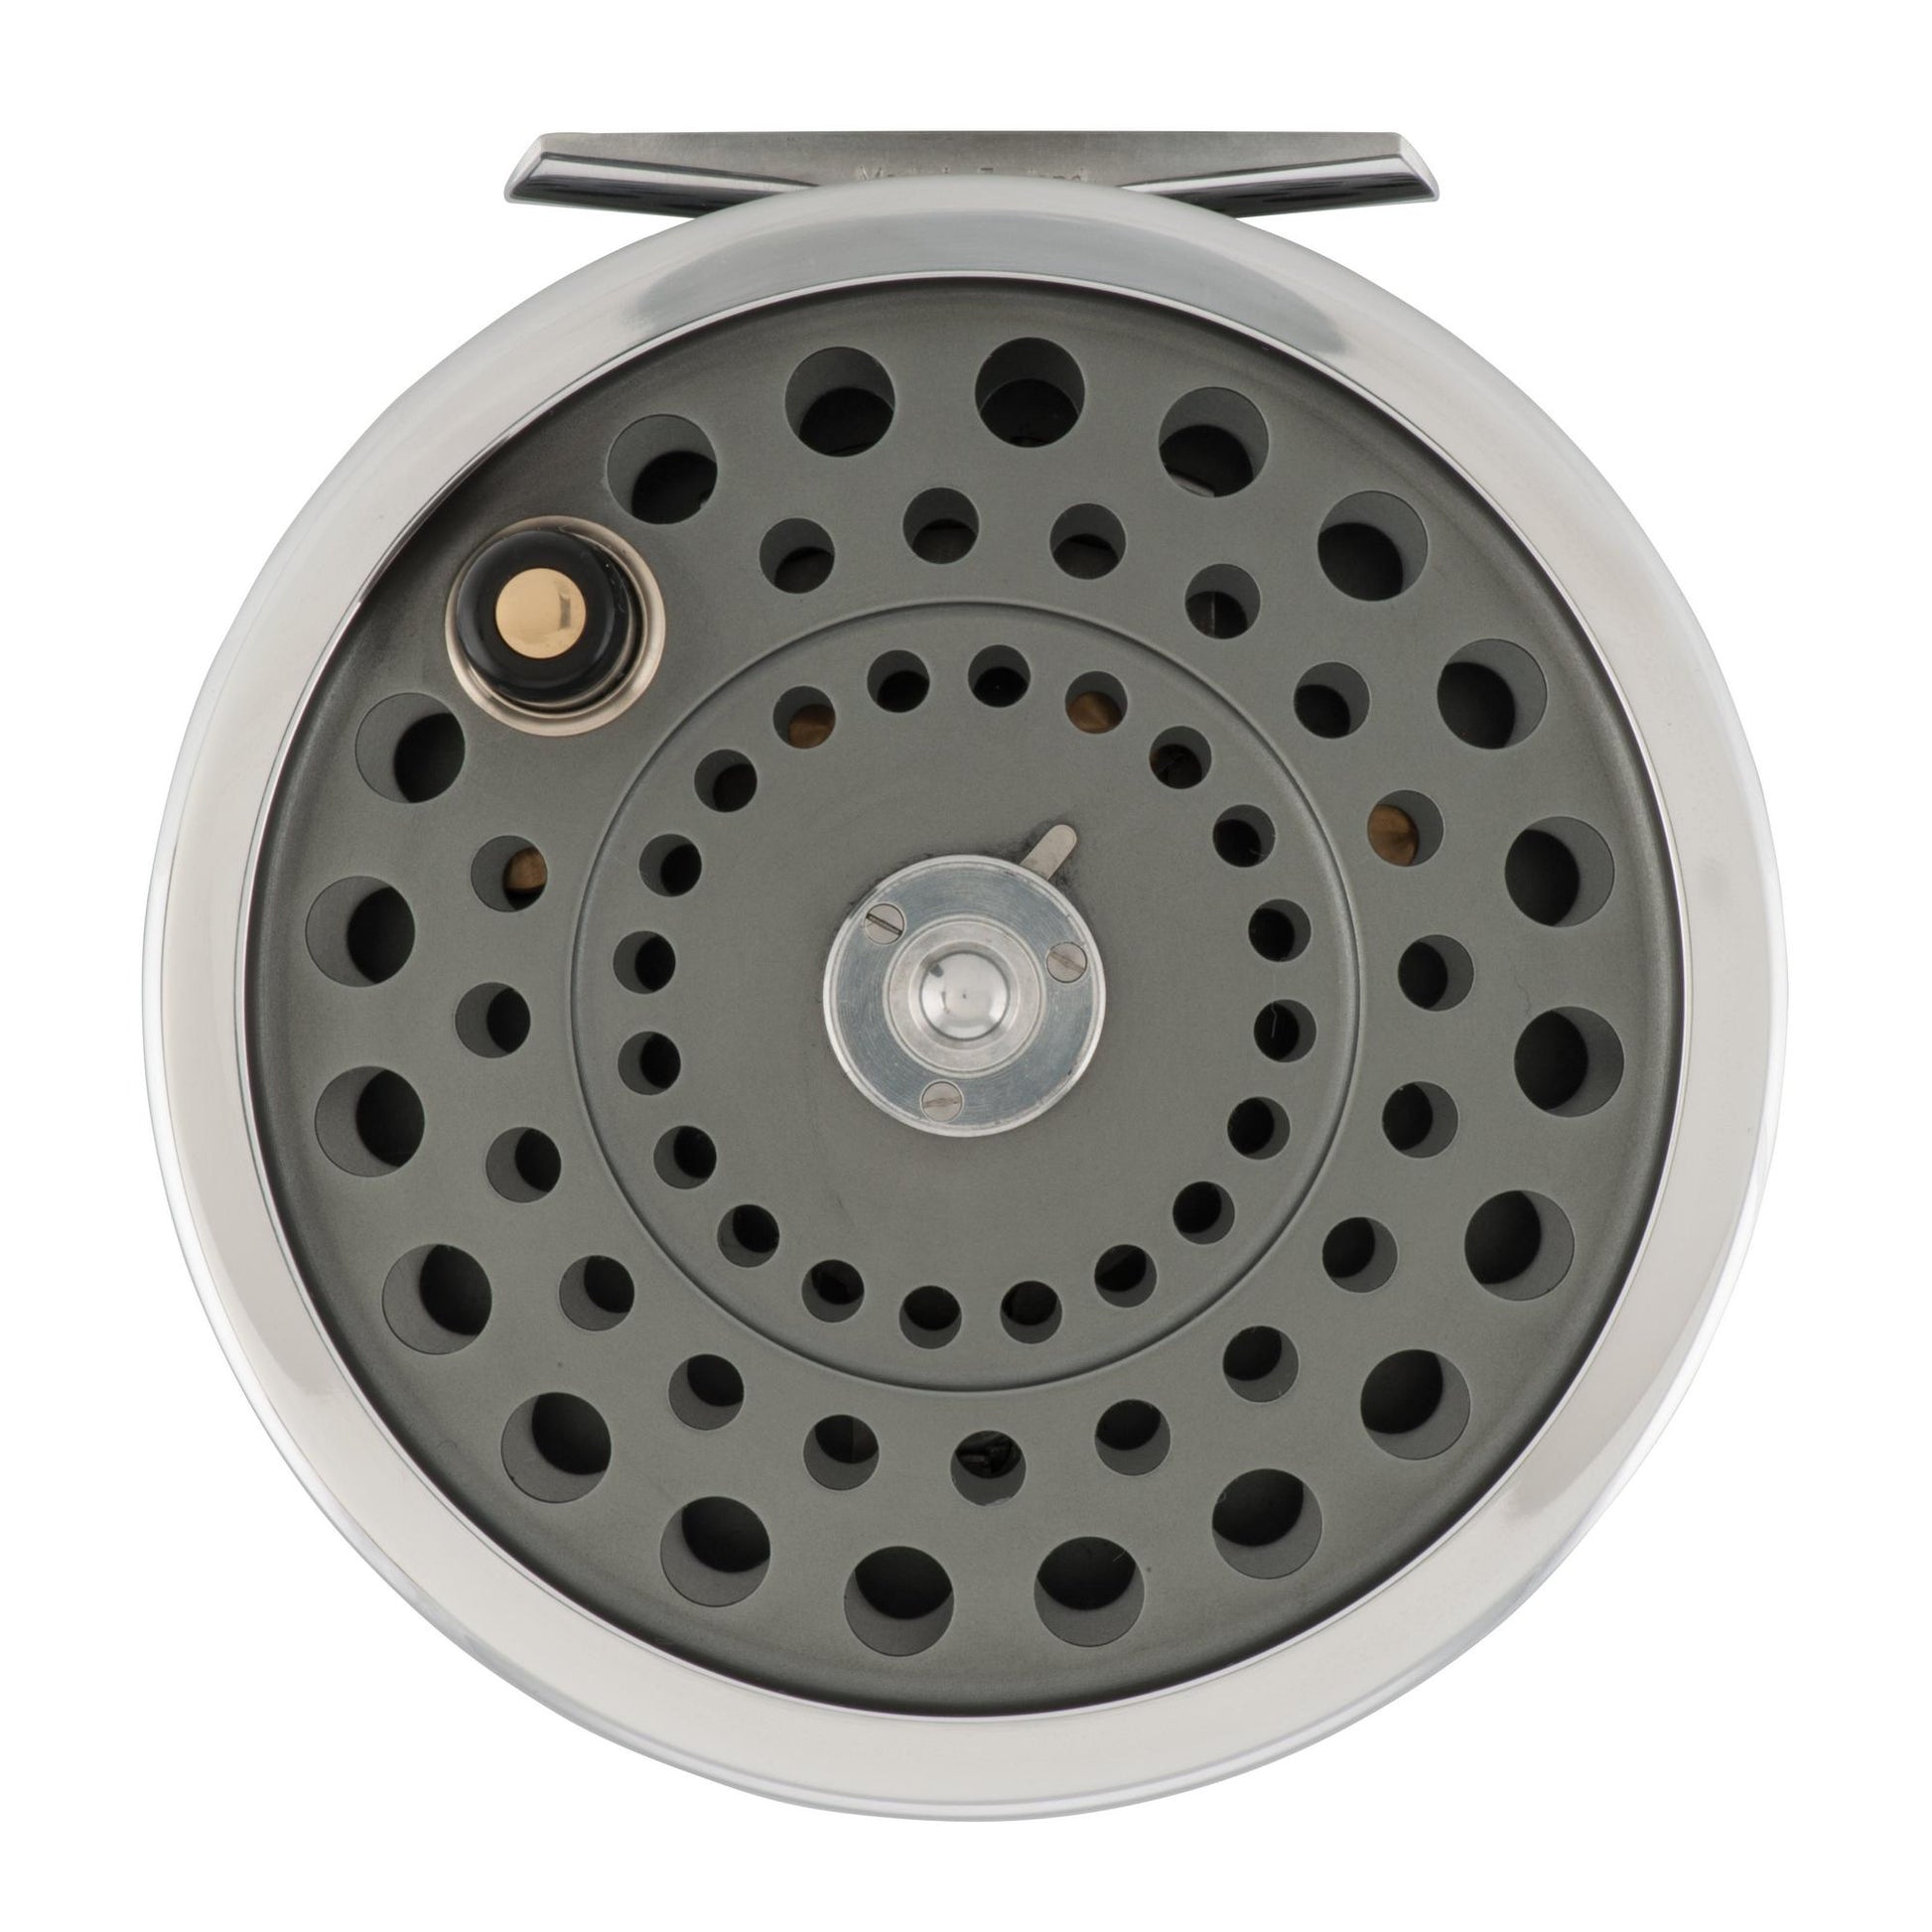 HARDY LWT MARQUIS 6 Fly Reel $249.99 - PicClick